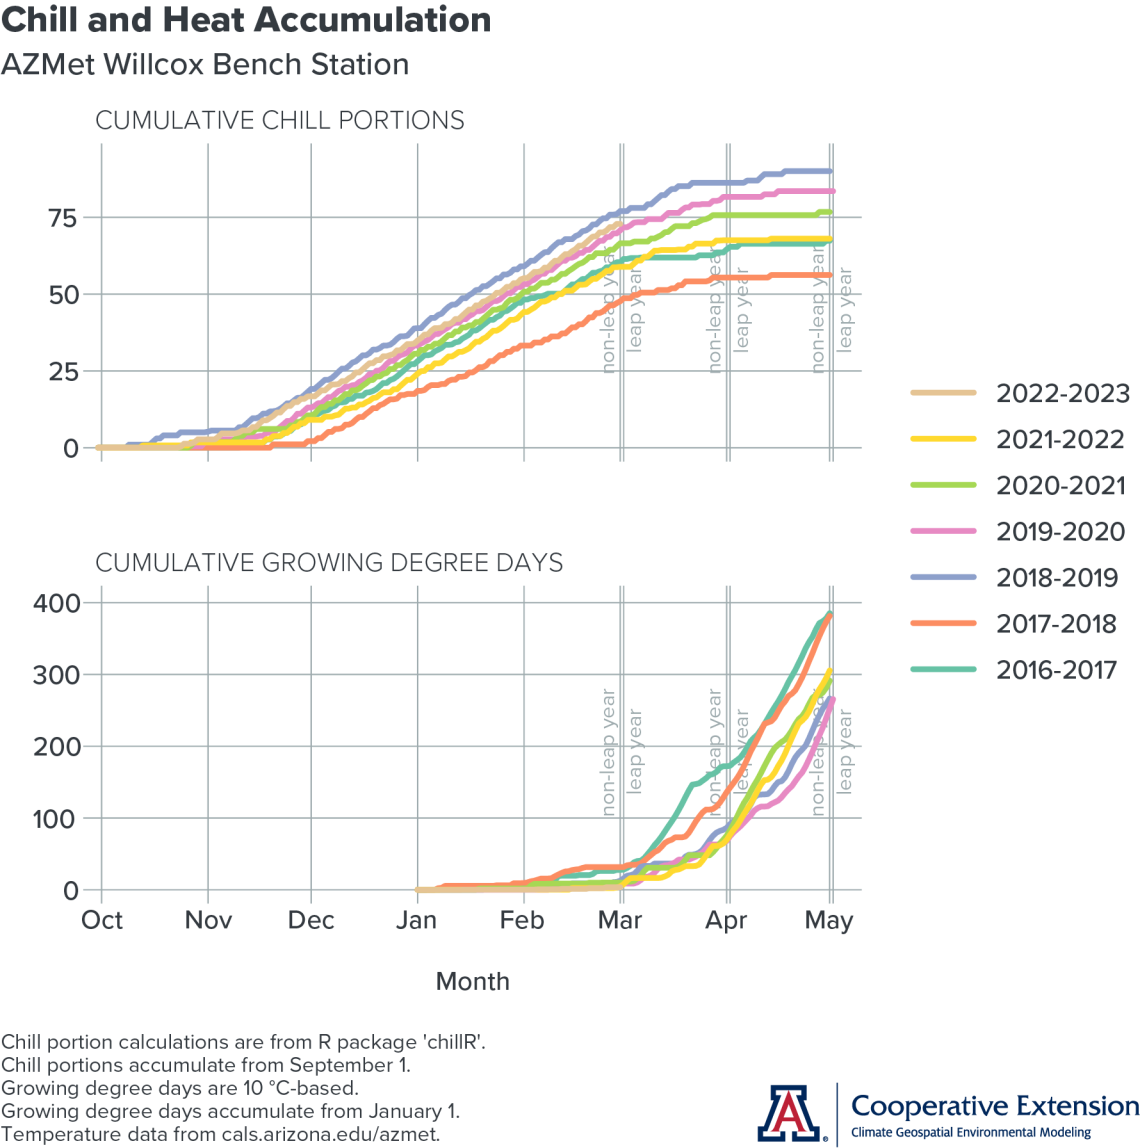 graphs of chill and heat accumulation at AZMet Willcox Bench station